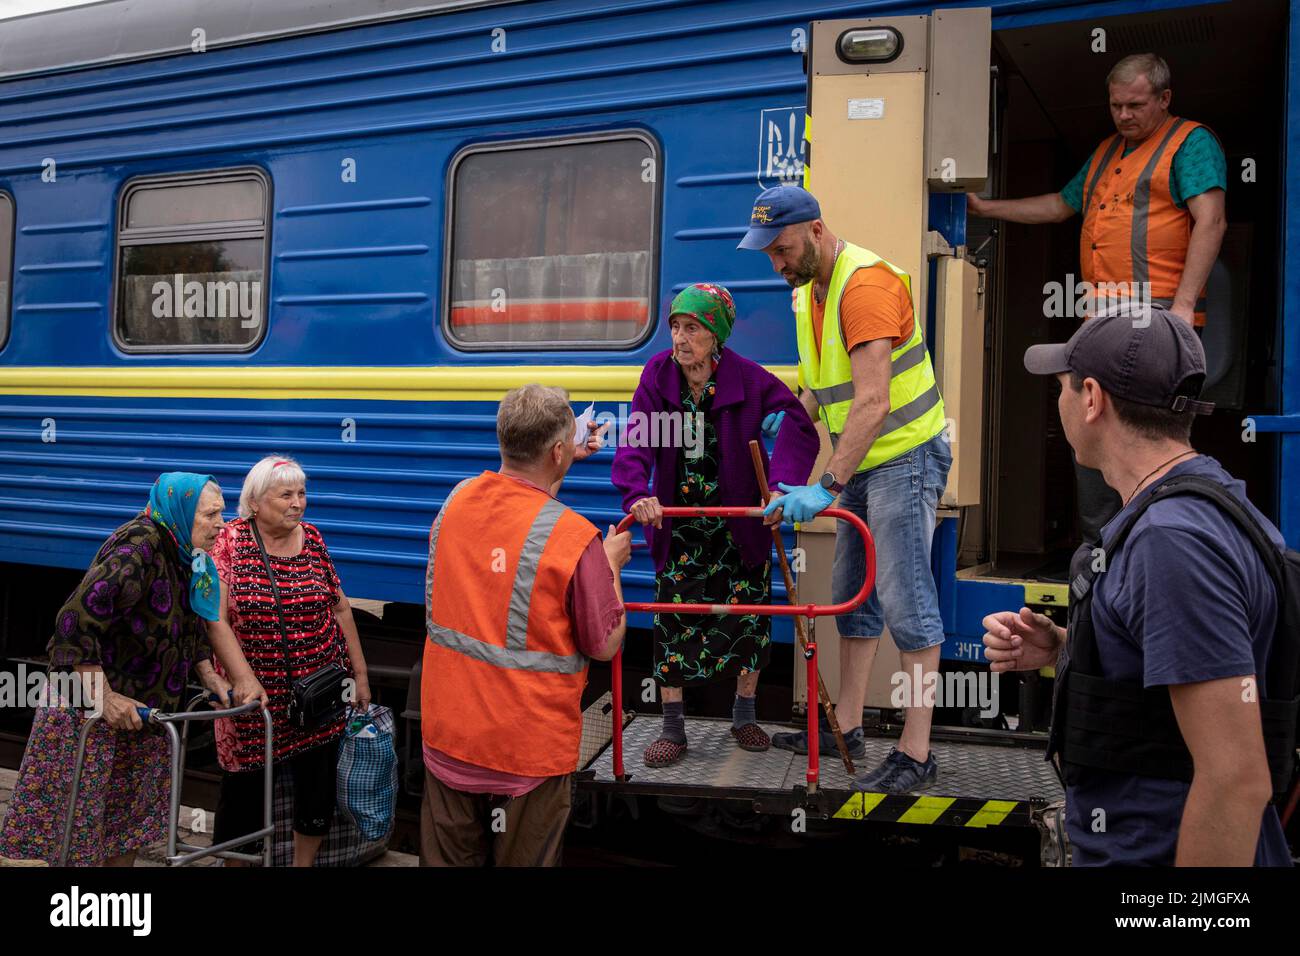 Volunteers assisting the elders to board the evacuation train at Pokorvsk Train Station, Donetsk. Amid the intensified fighting in the Eastern part of Ukraine, east Ukraine is now intensifying its civilian evacuation, as millions of Ukrainian families have been evacuating from the closer and closer war, as many of them will be relocated to the western part of the country. According to the United Nations, at least 12 million people have fled their homes since Russia's invasion of Ukraine, while seven million people are displaced inside the country. Stock Photo